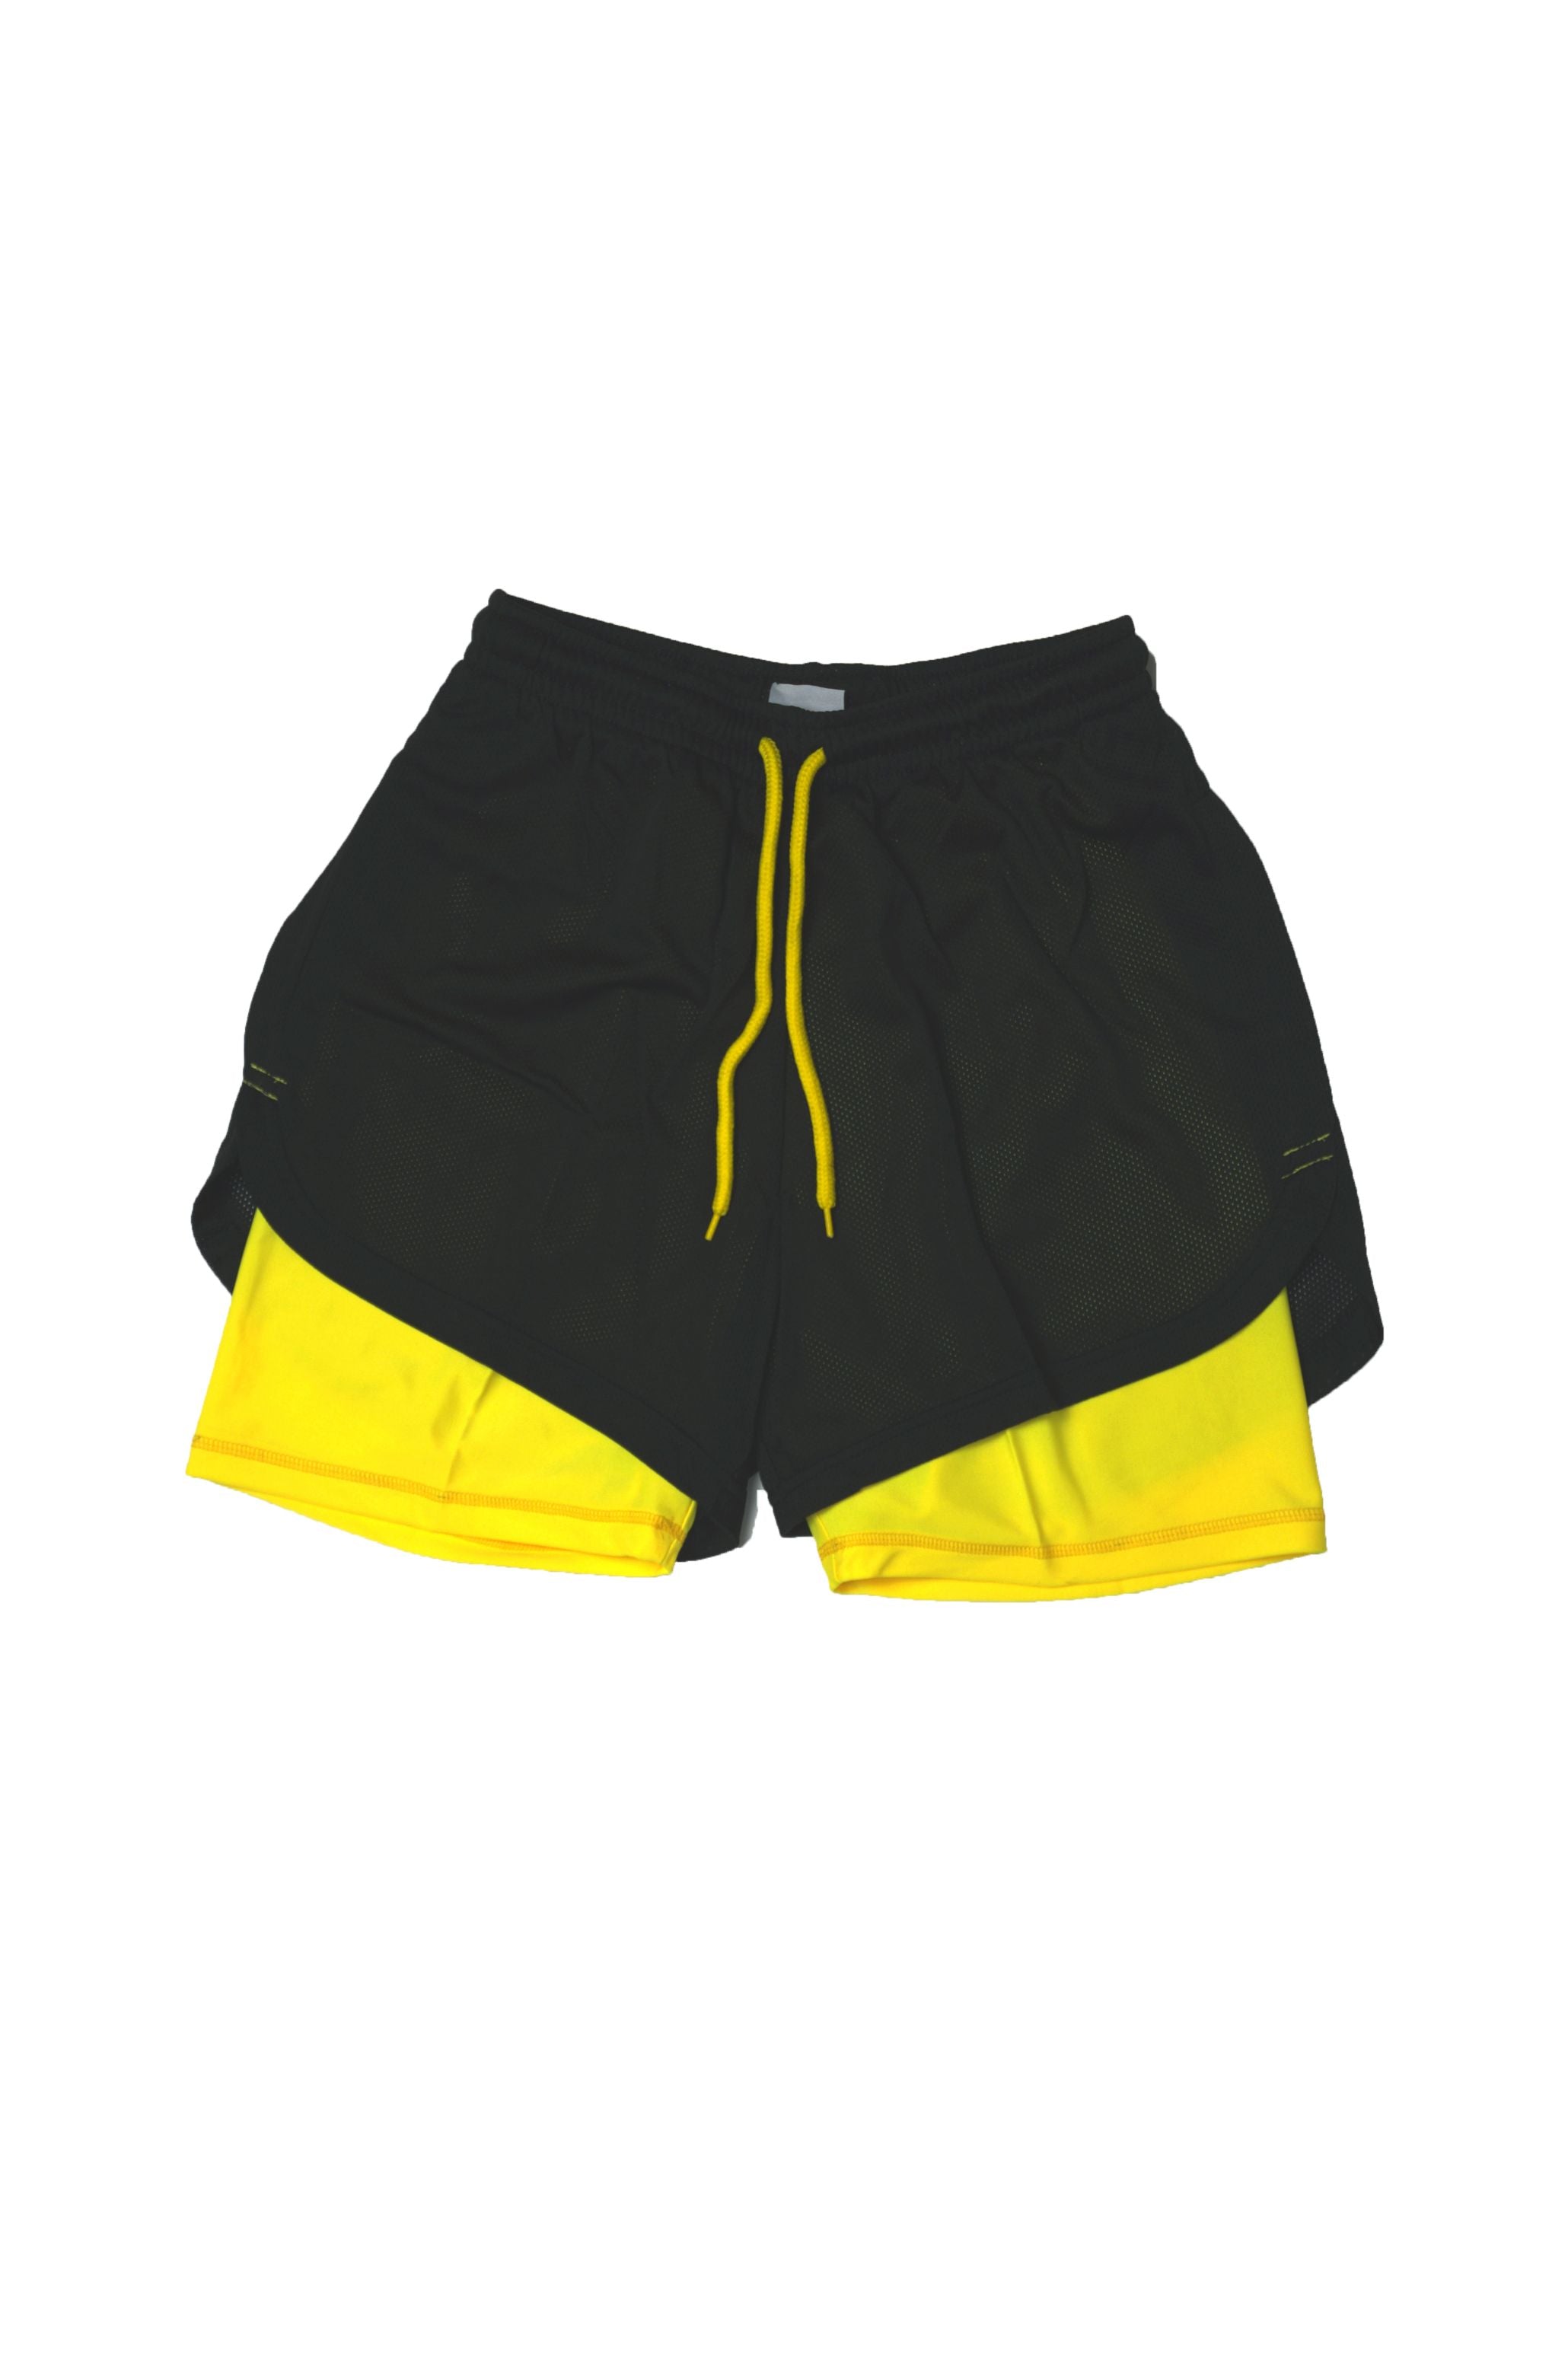 WOMEN FITNESS SHORTS BLACK AND YELLOW COLOUR